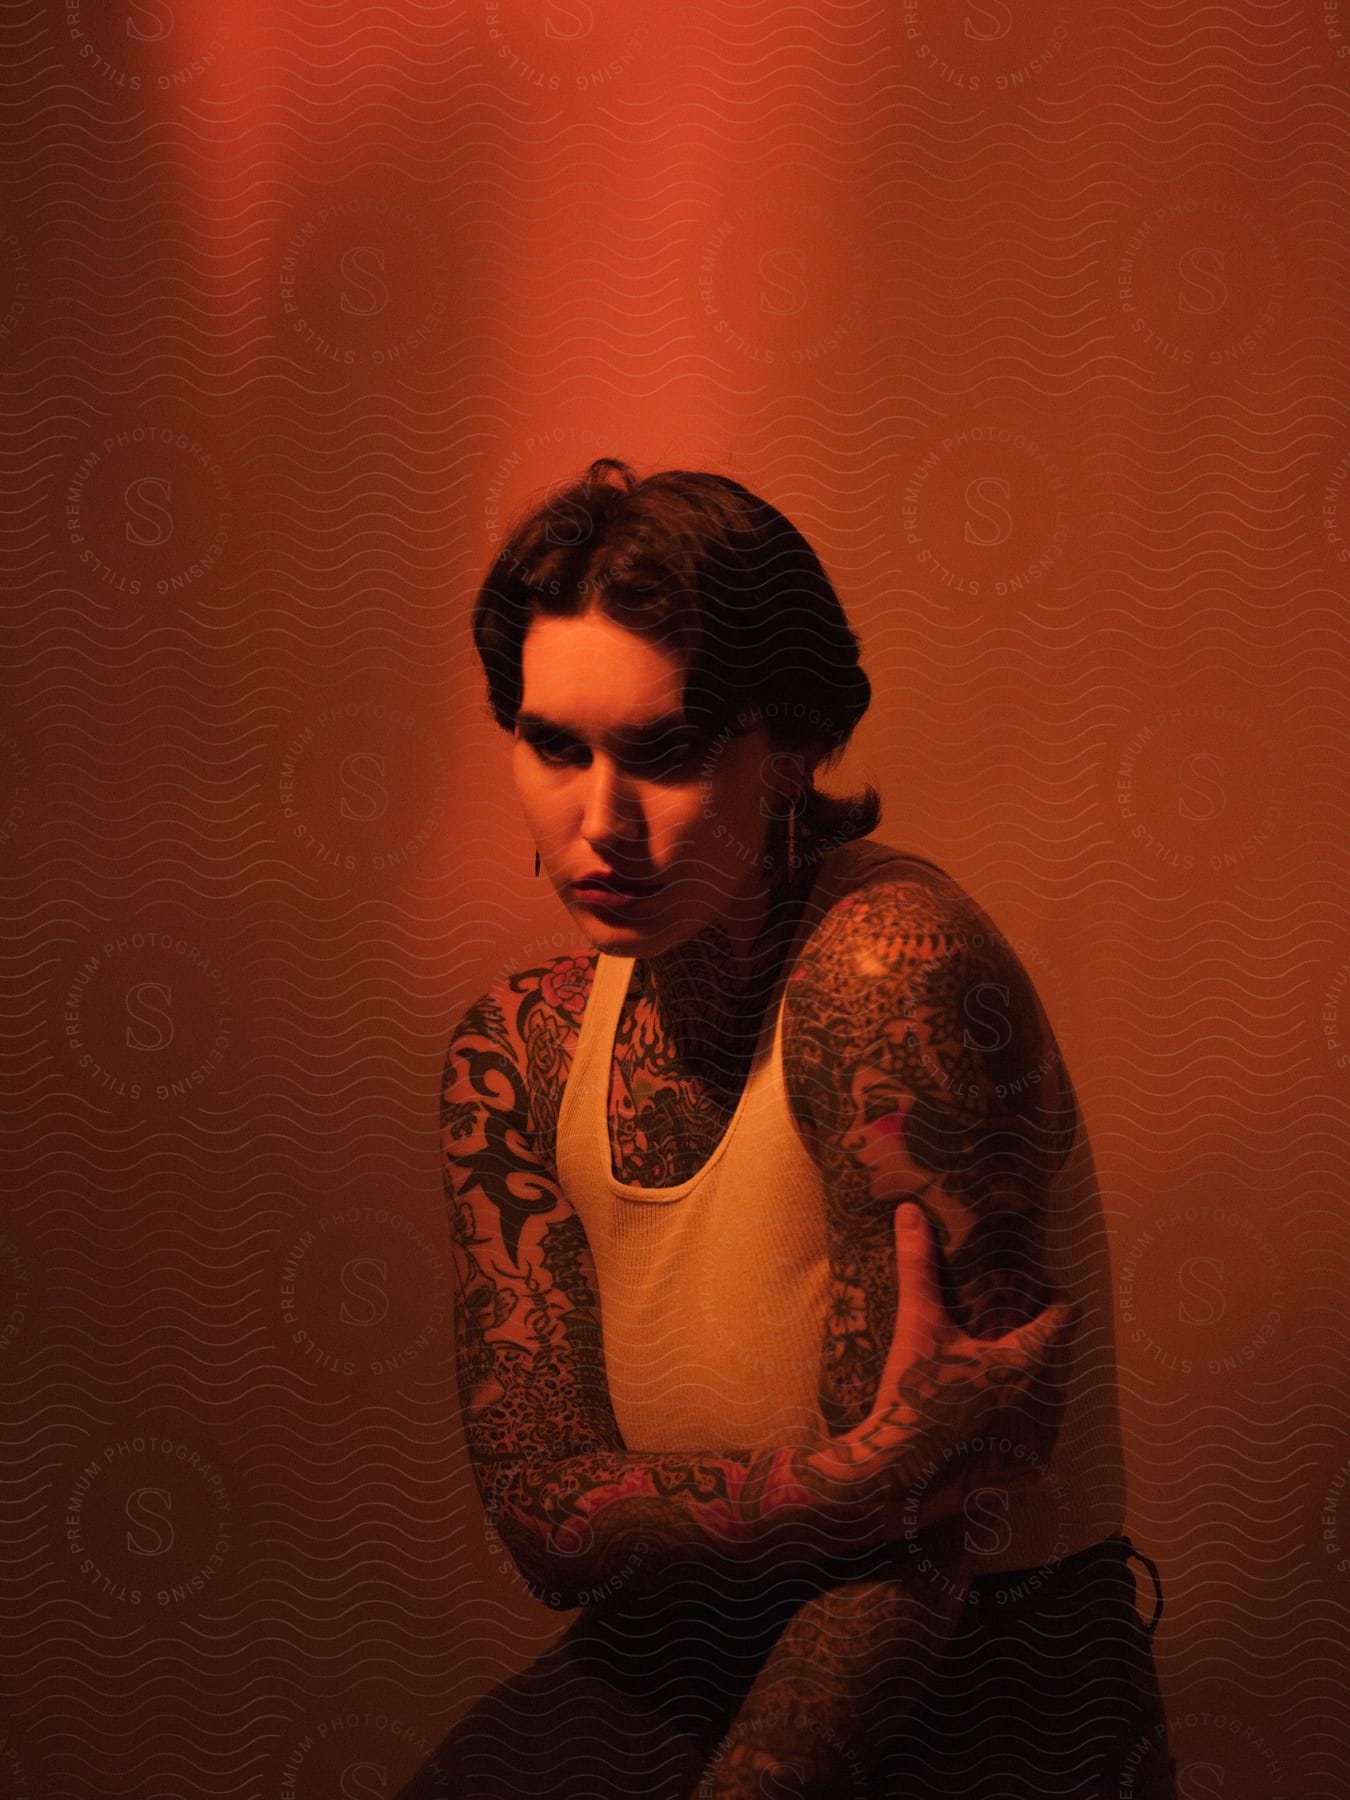 A woman with tattoos sitting on a stool in a red room